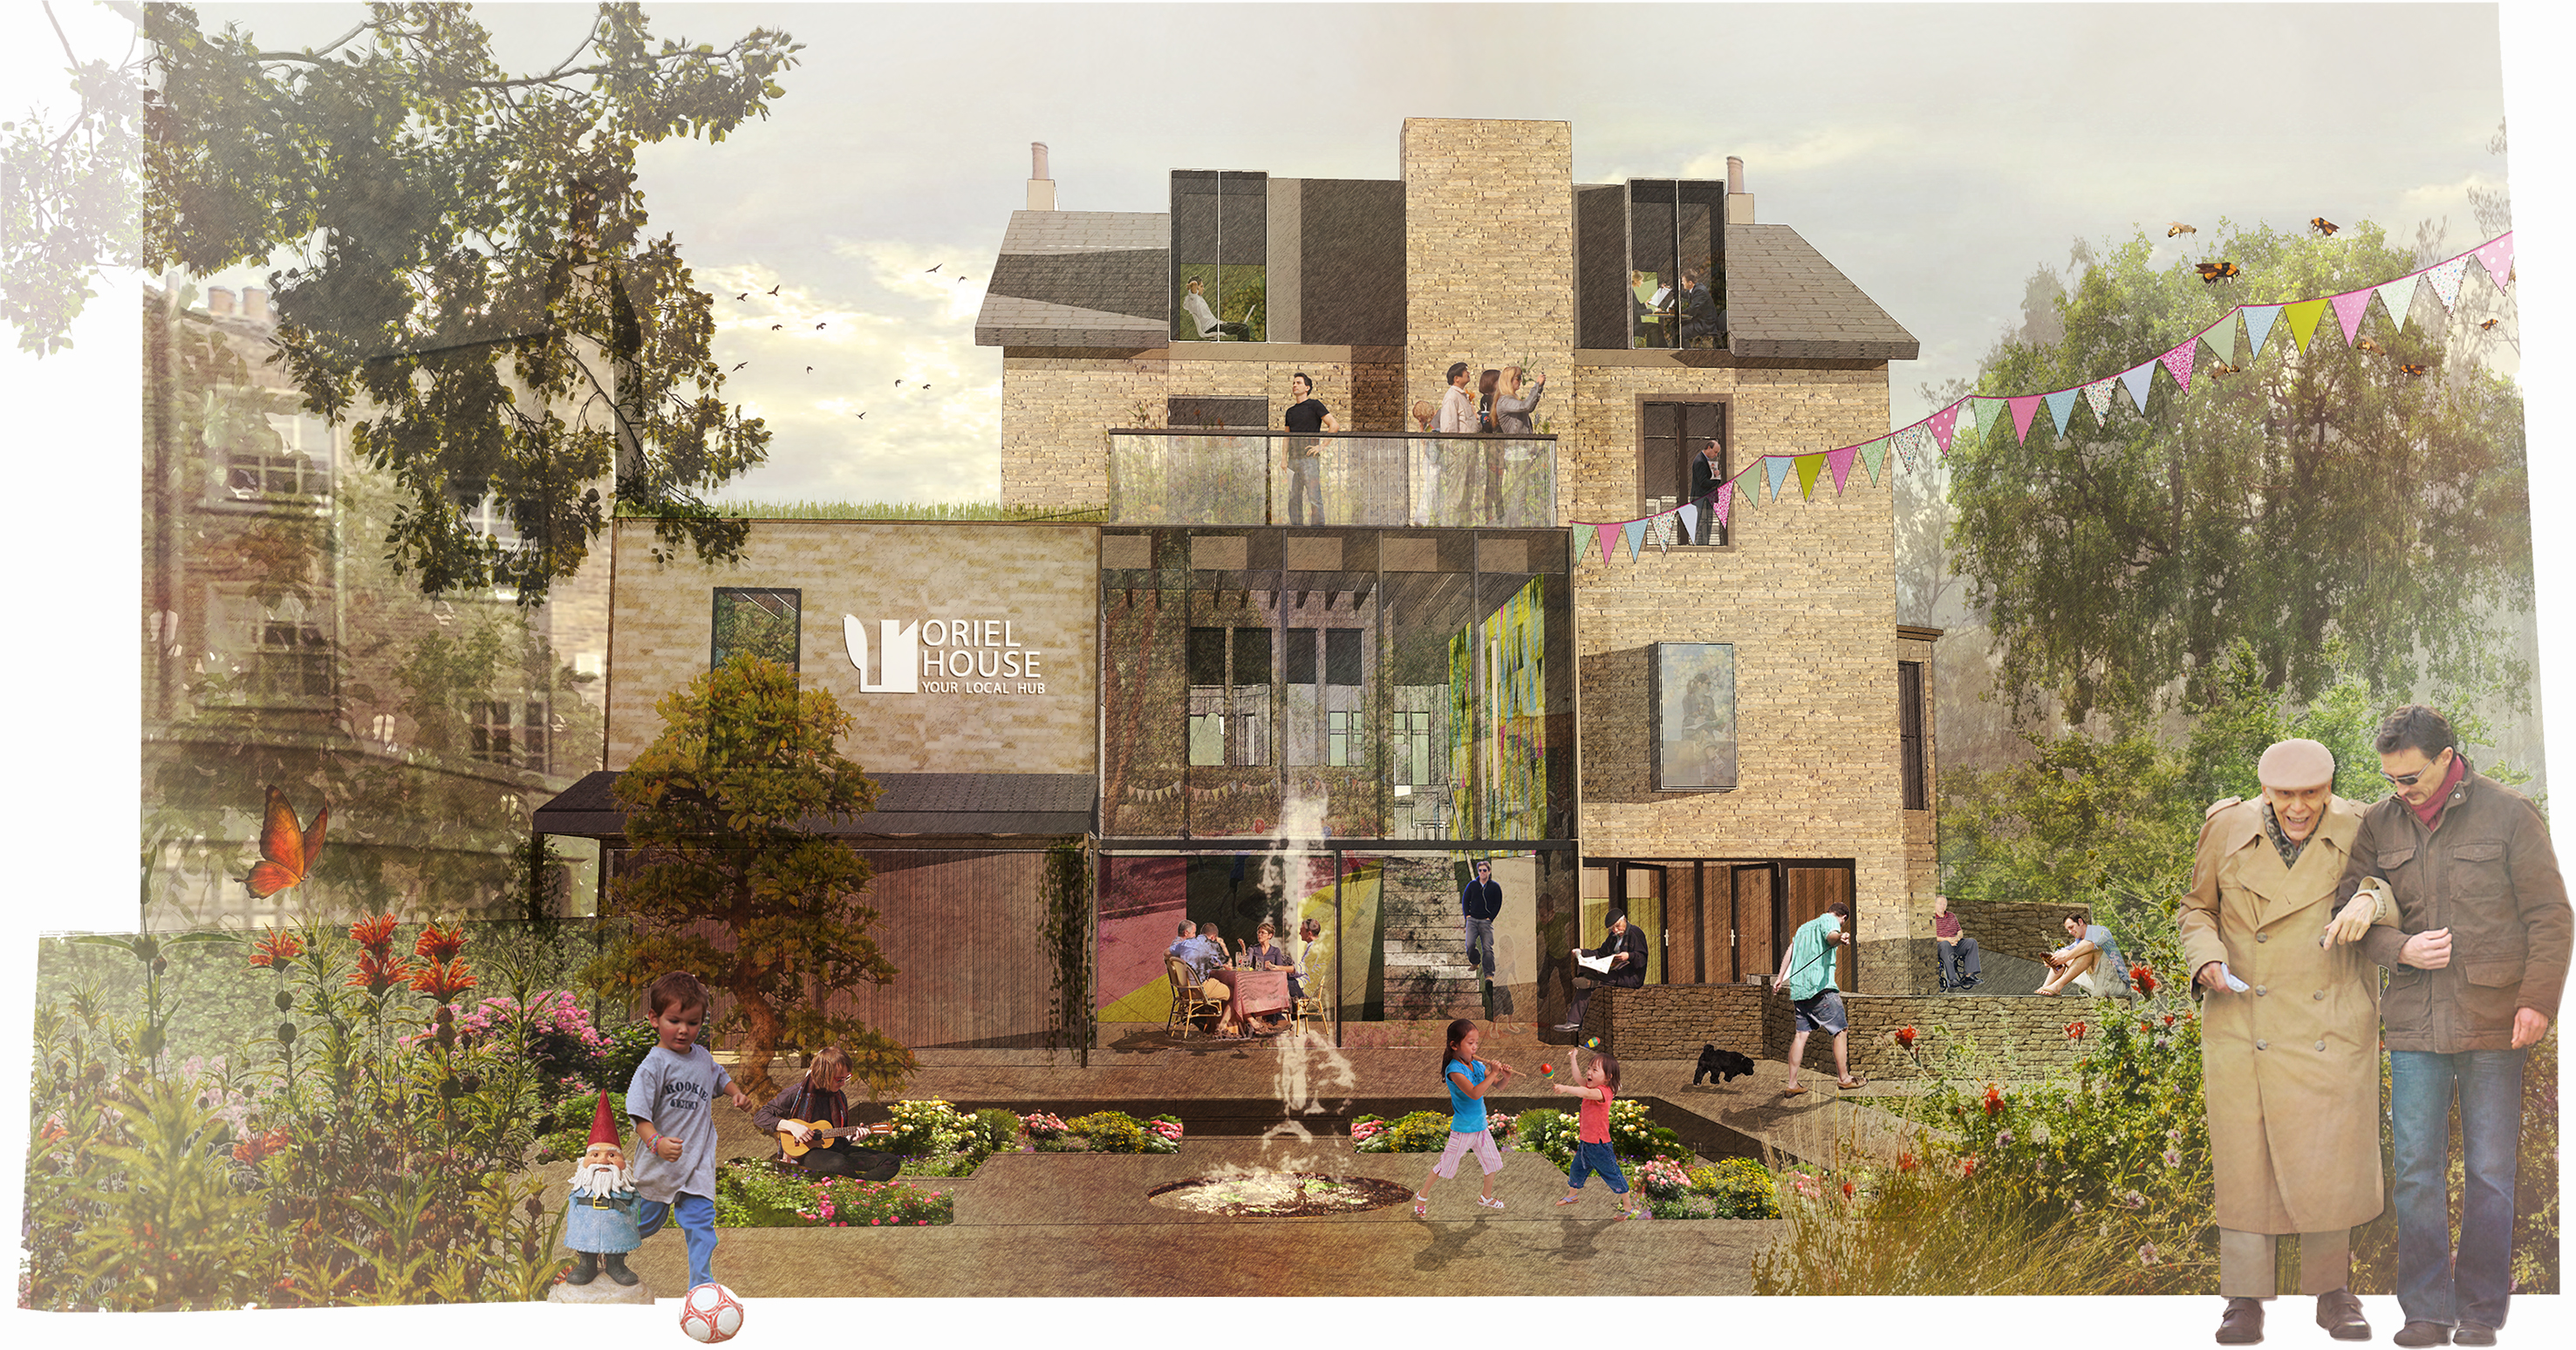 Vision for the future of Oriel House